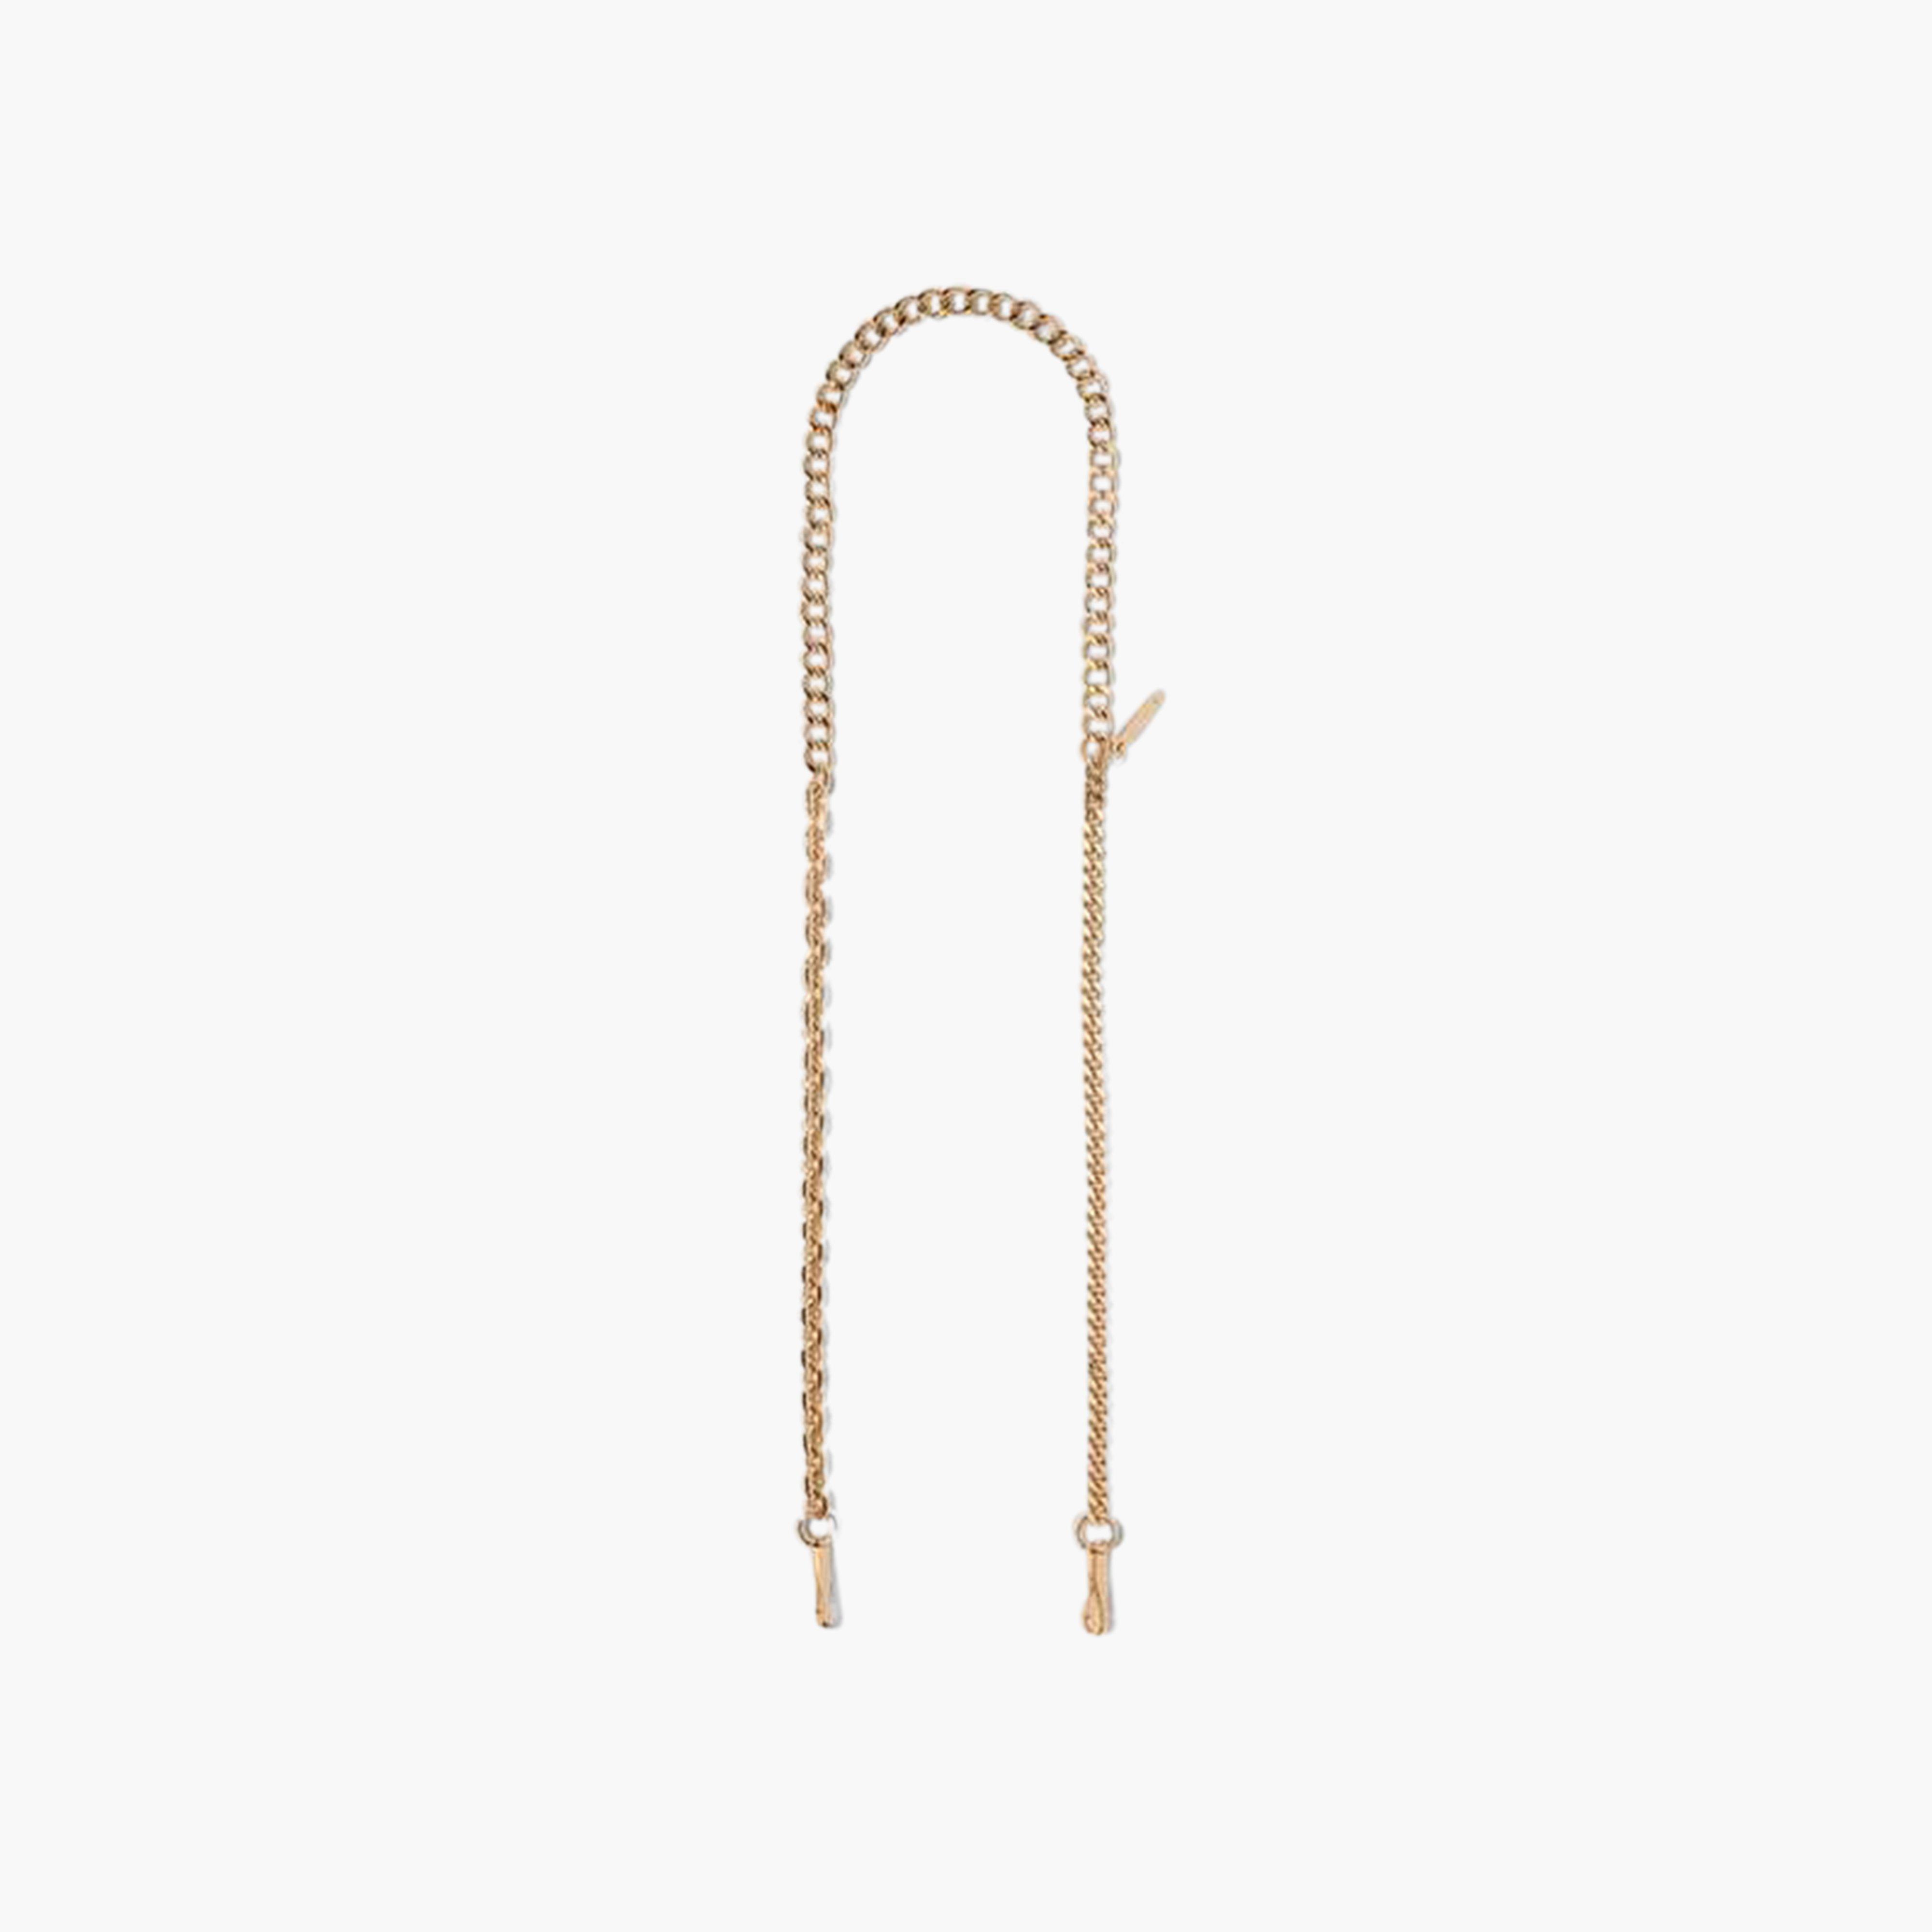 Marc by Marc jacobs The Chain Strap | The Marc jacobs | Official Site,GOLD